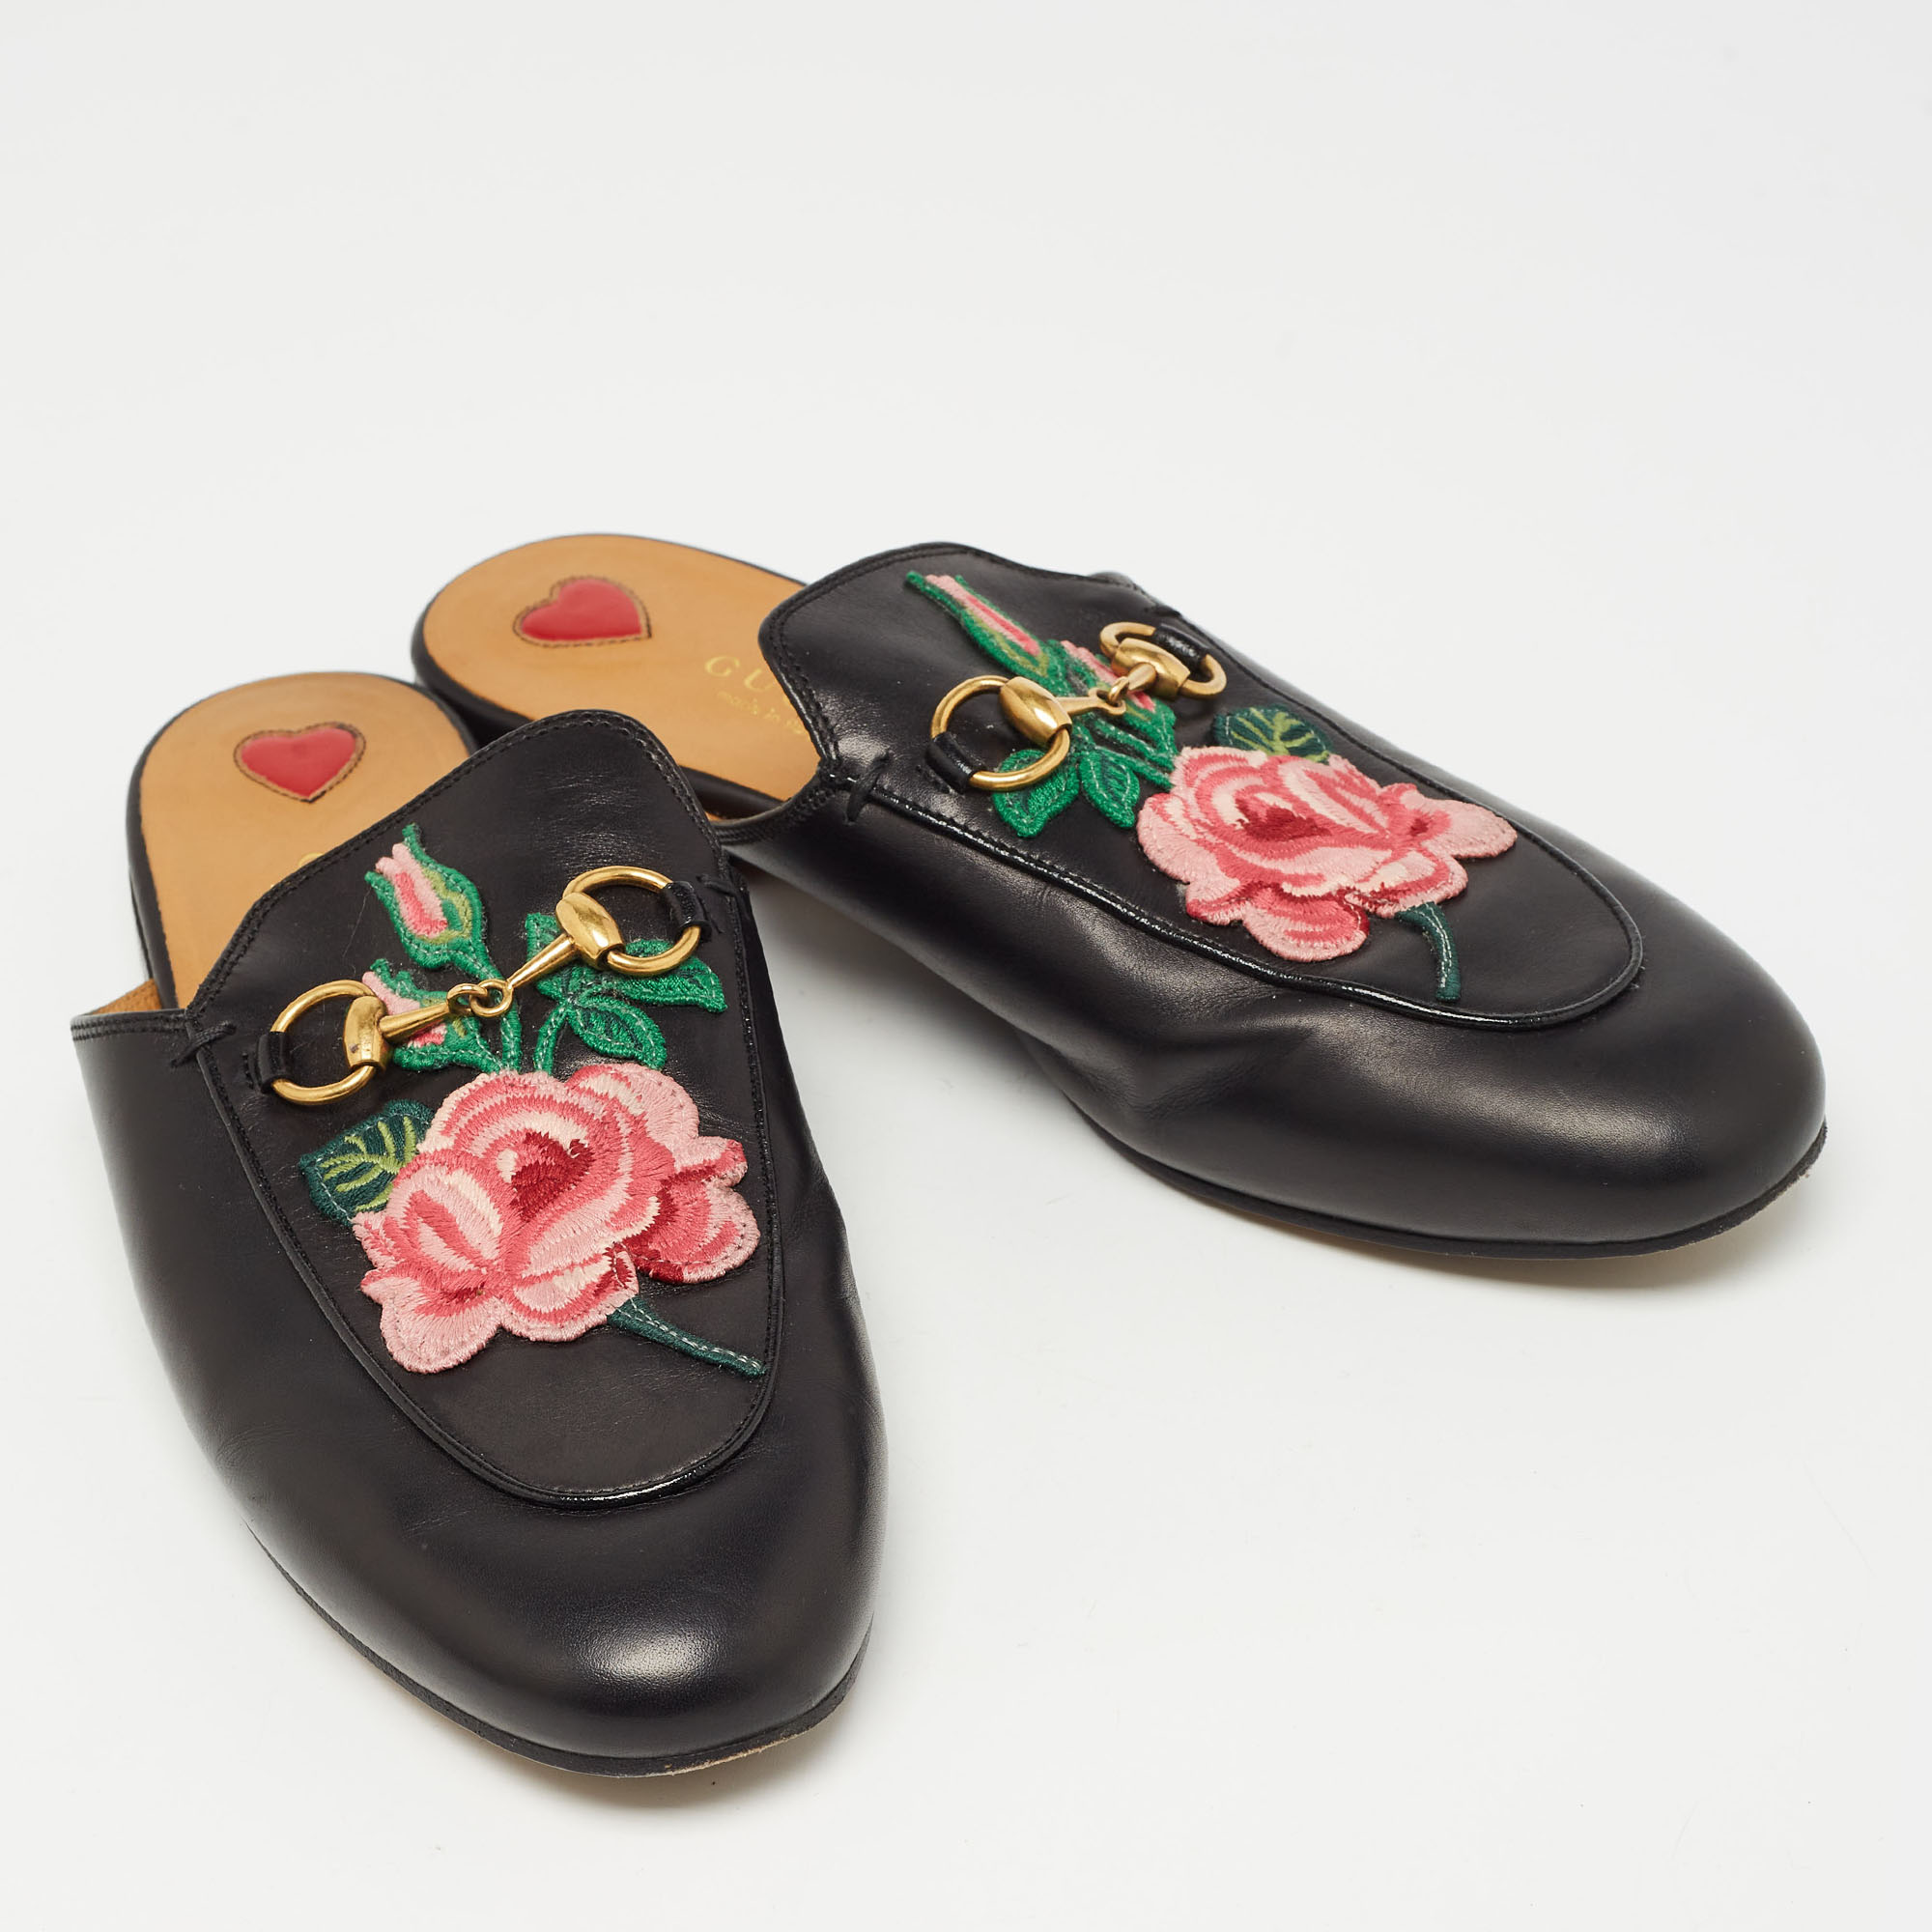 Gucci Black Leather Rose Embroidered Princetown Horsebit Flat Mules Size 37